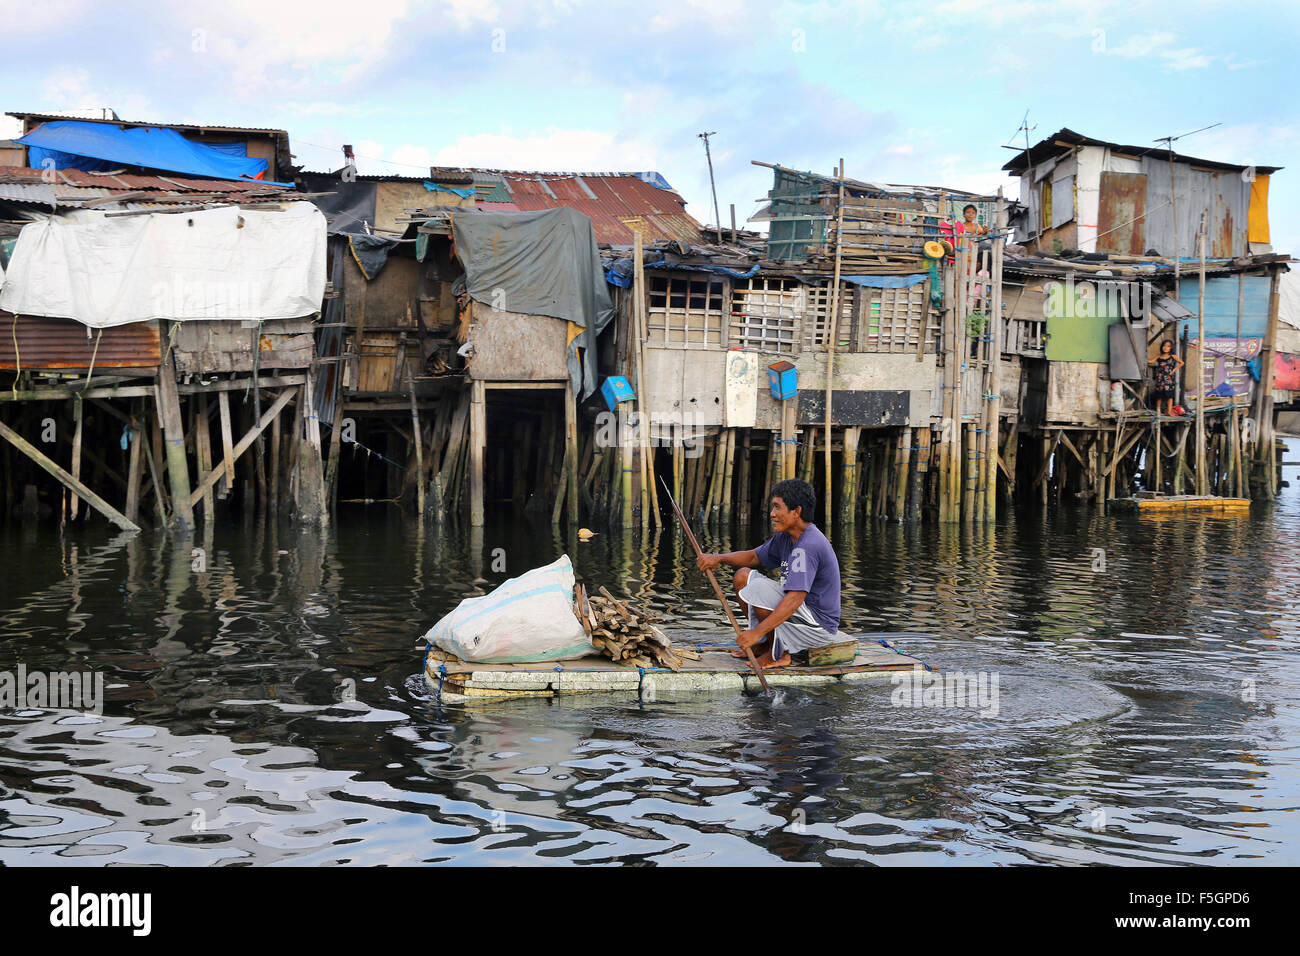 Manila, The Philippines: Resident of a poor neighborhood living in huts on stilts with firewood on a styrofoam float, Tondo township, Manila, Philippines Stock Photo